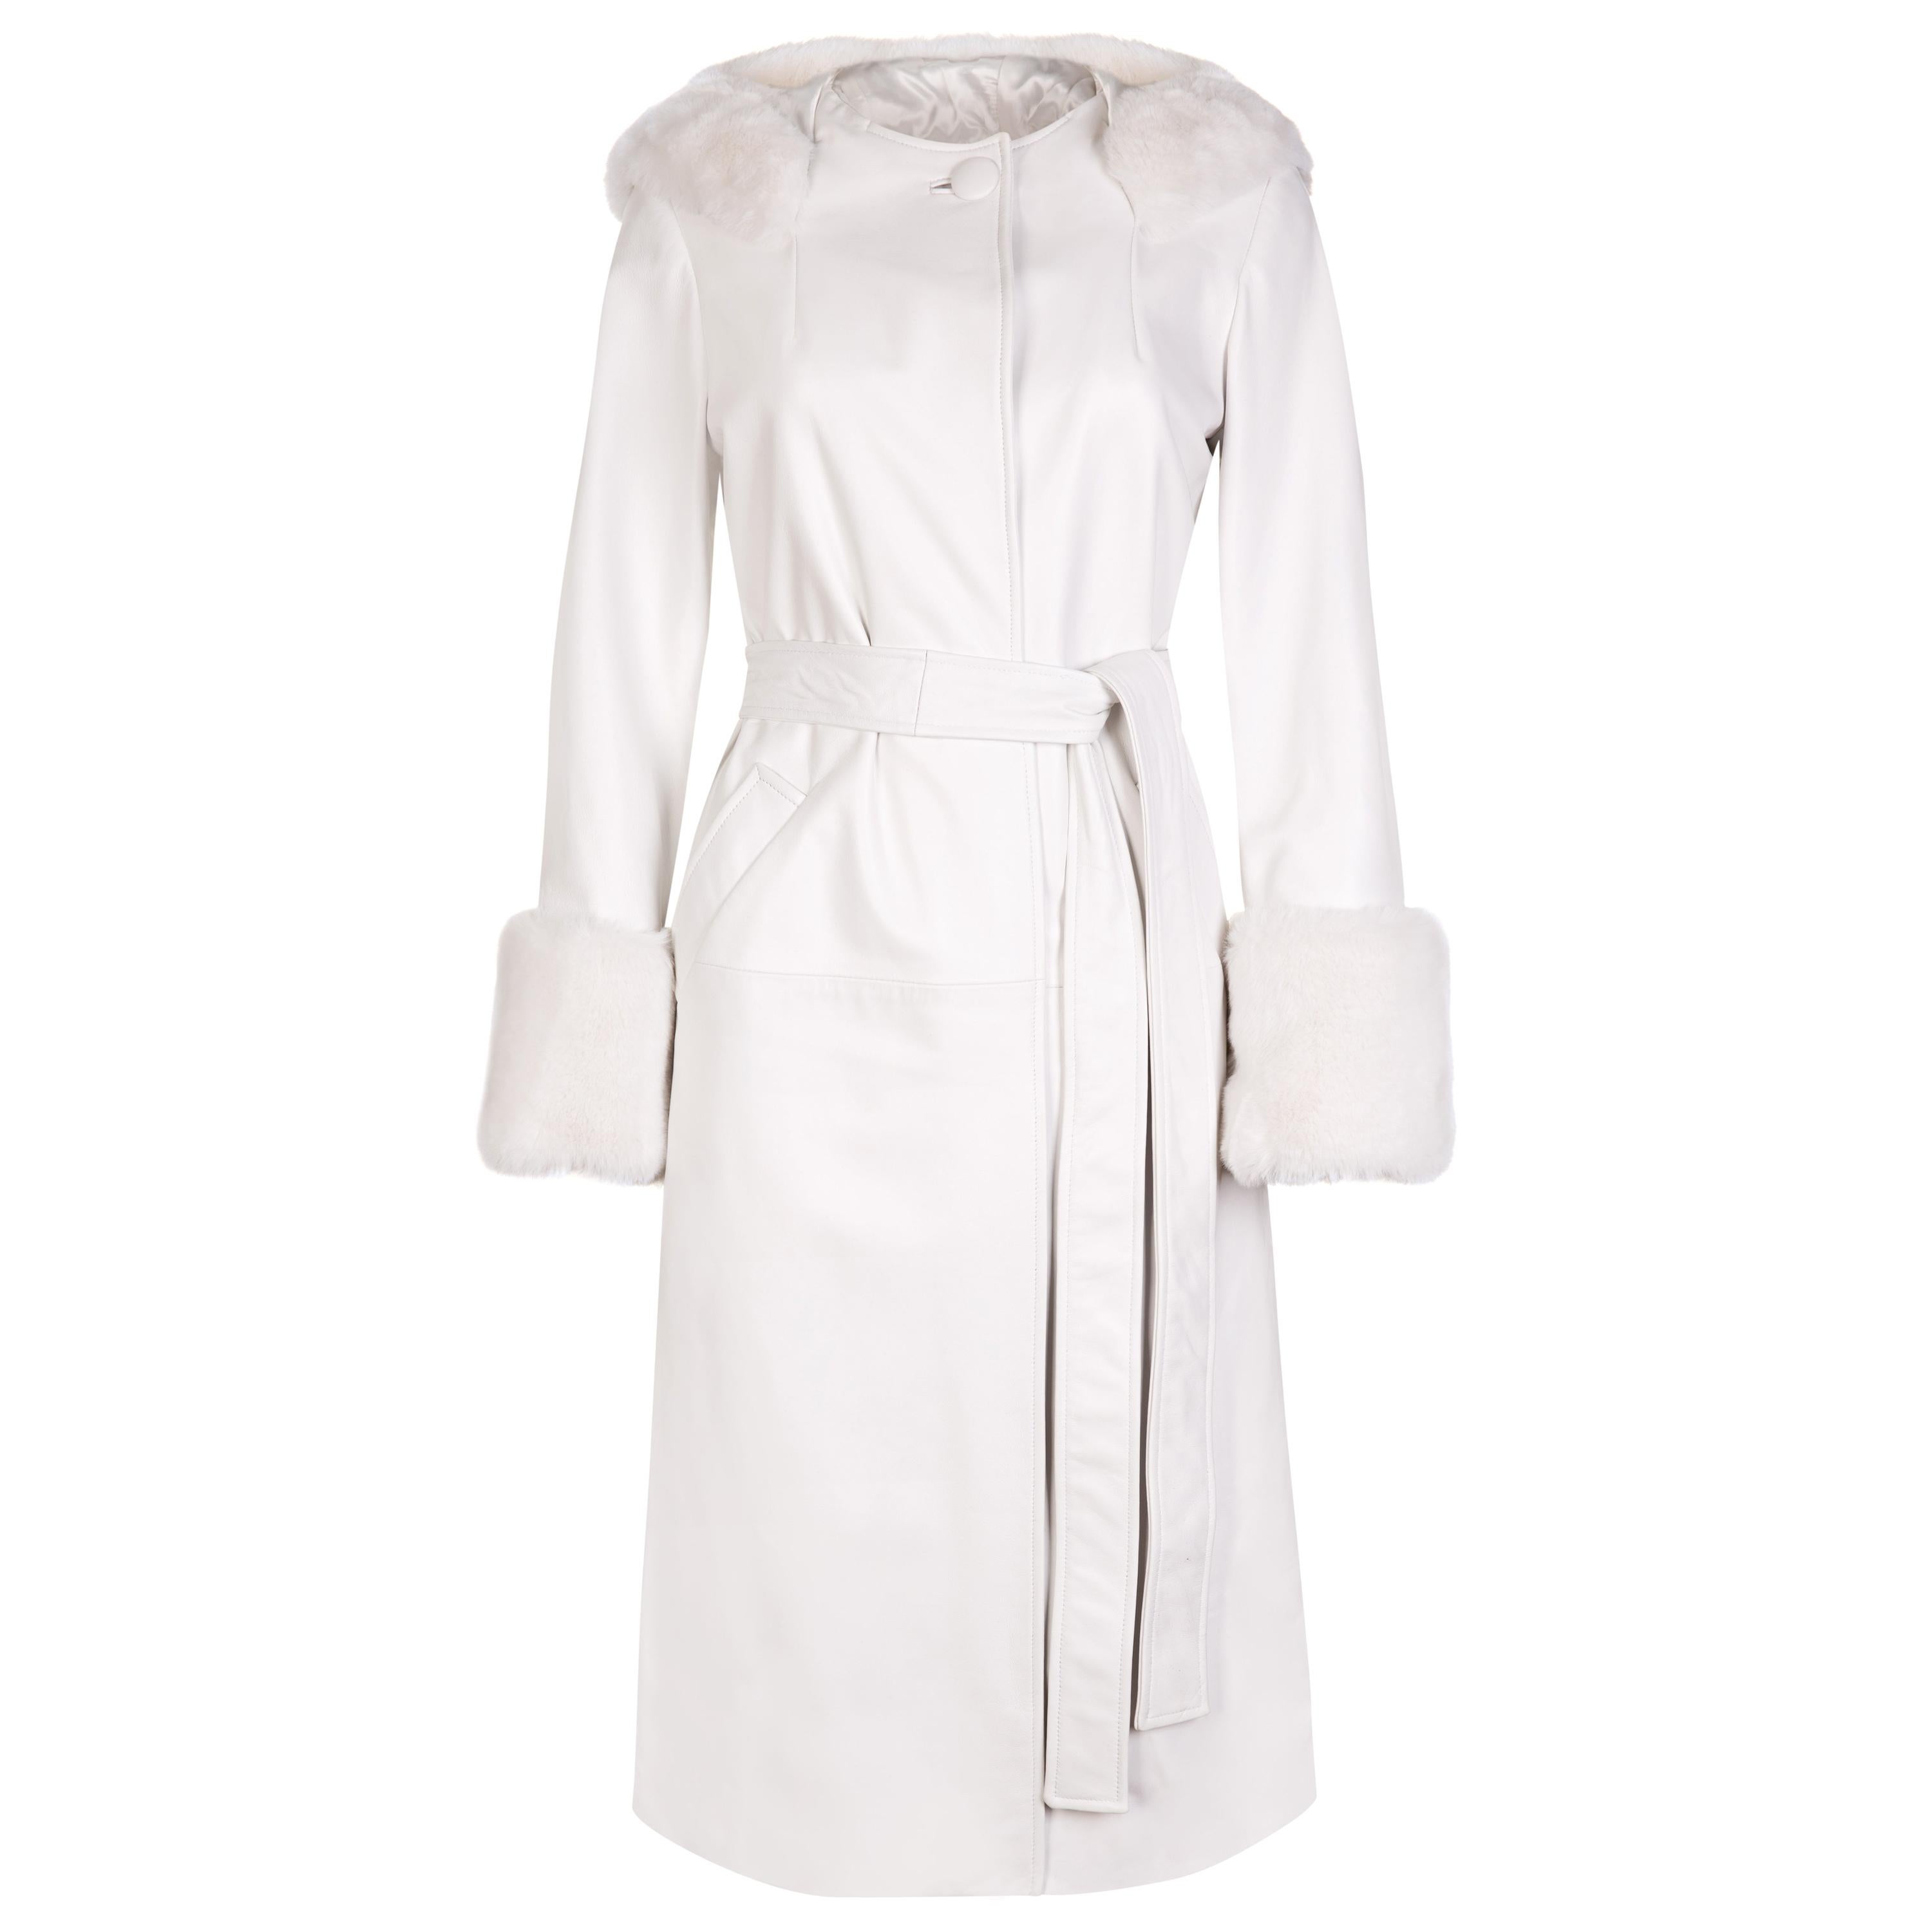 Verheyen Aurora Hooded Leather Trench Coat in White with Faux Fur - Size uk 16 For Sale